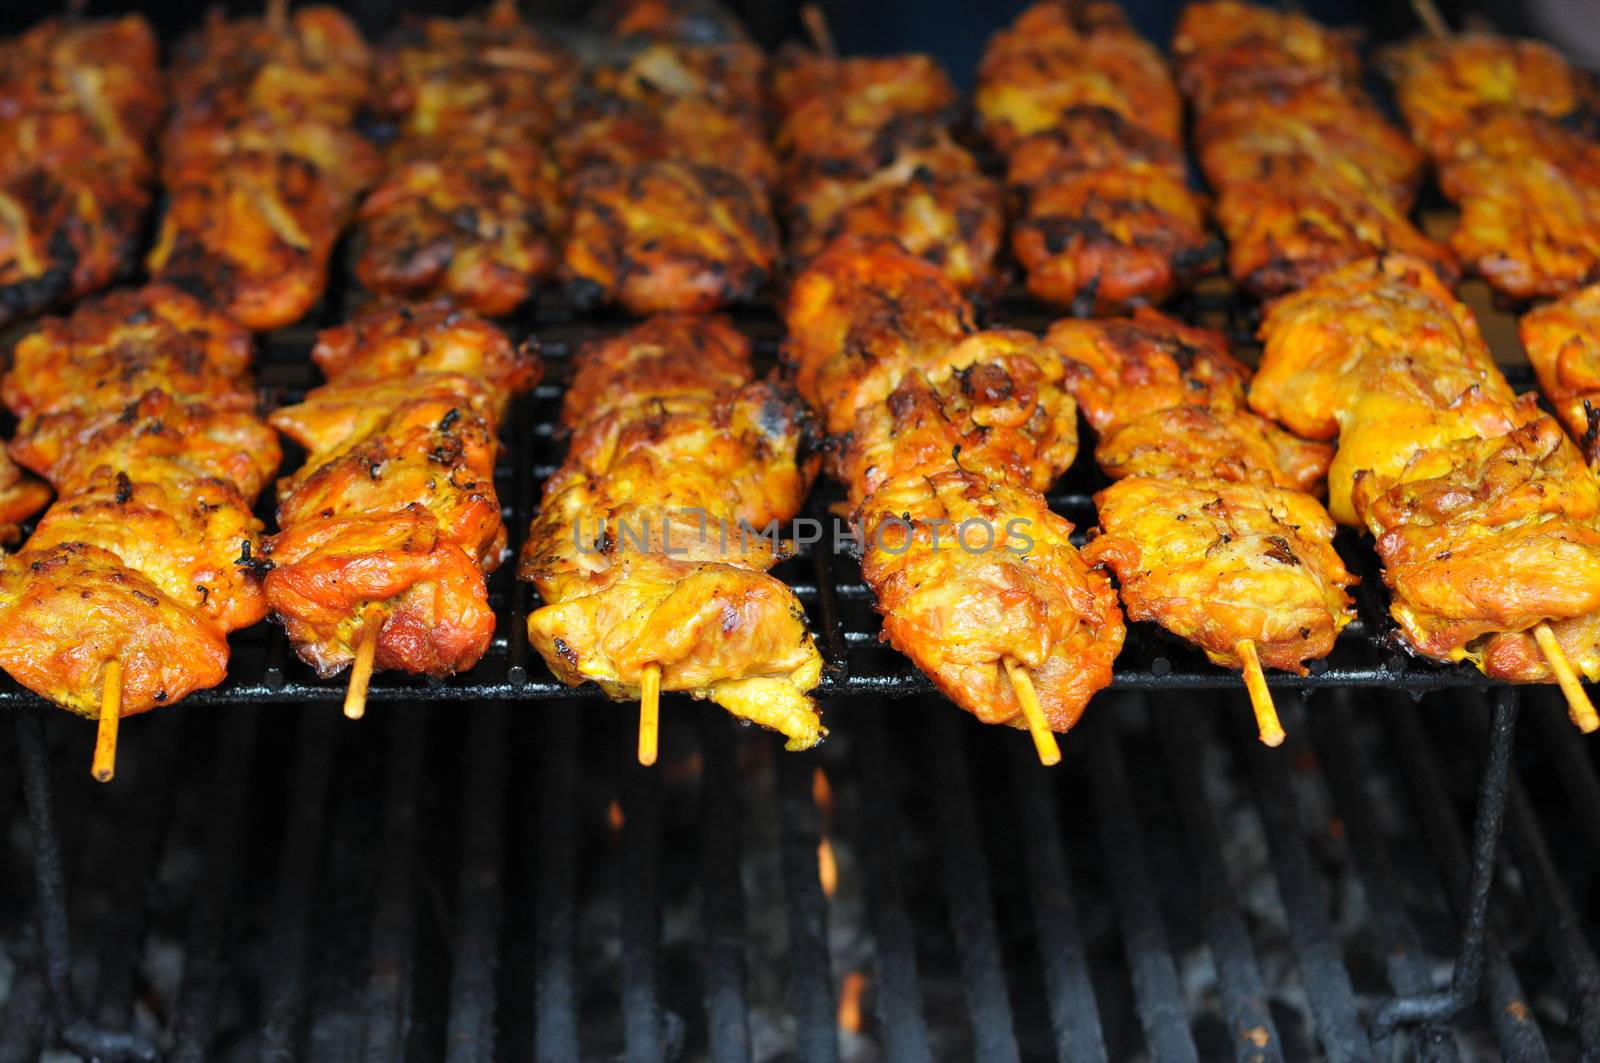 chicken on a grill by PDImages